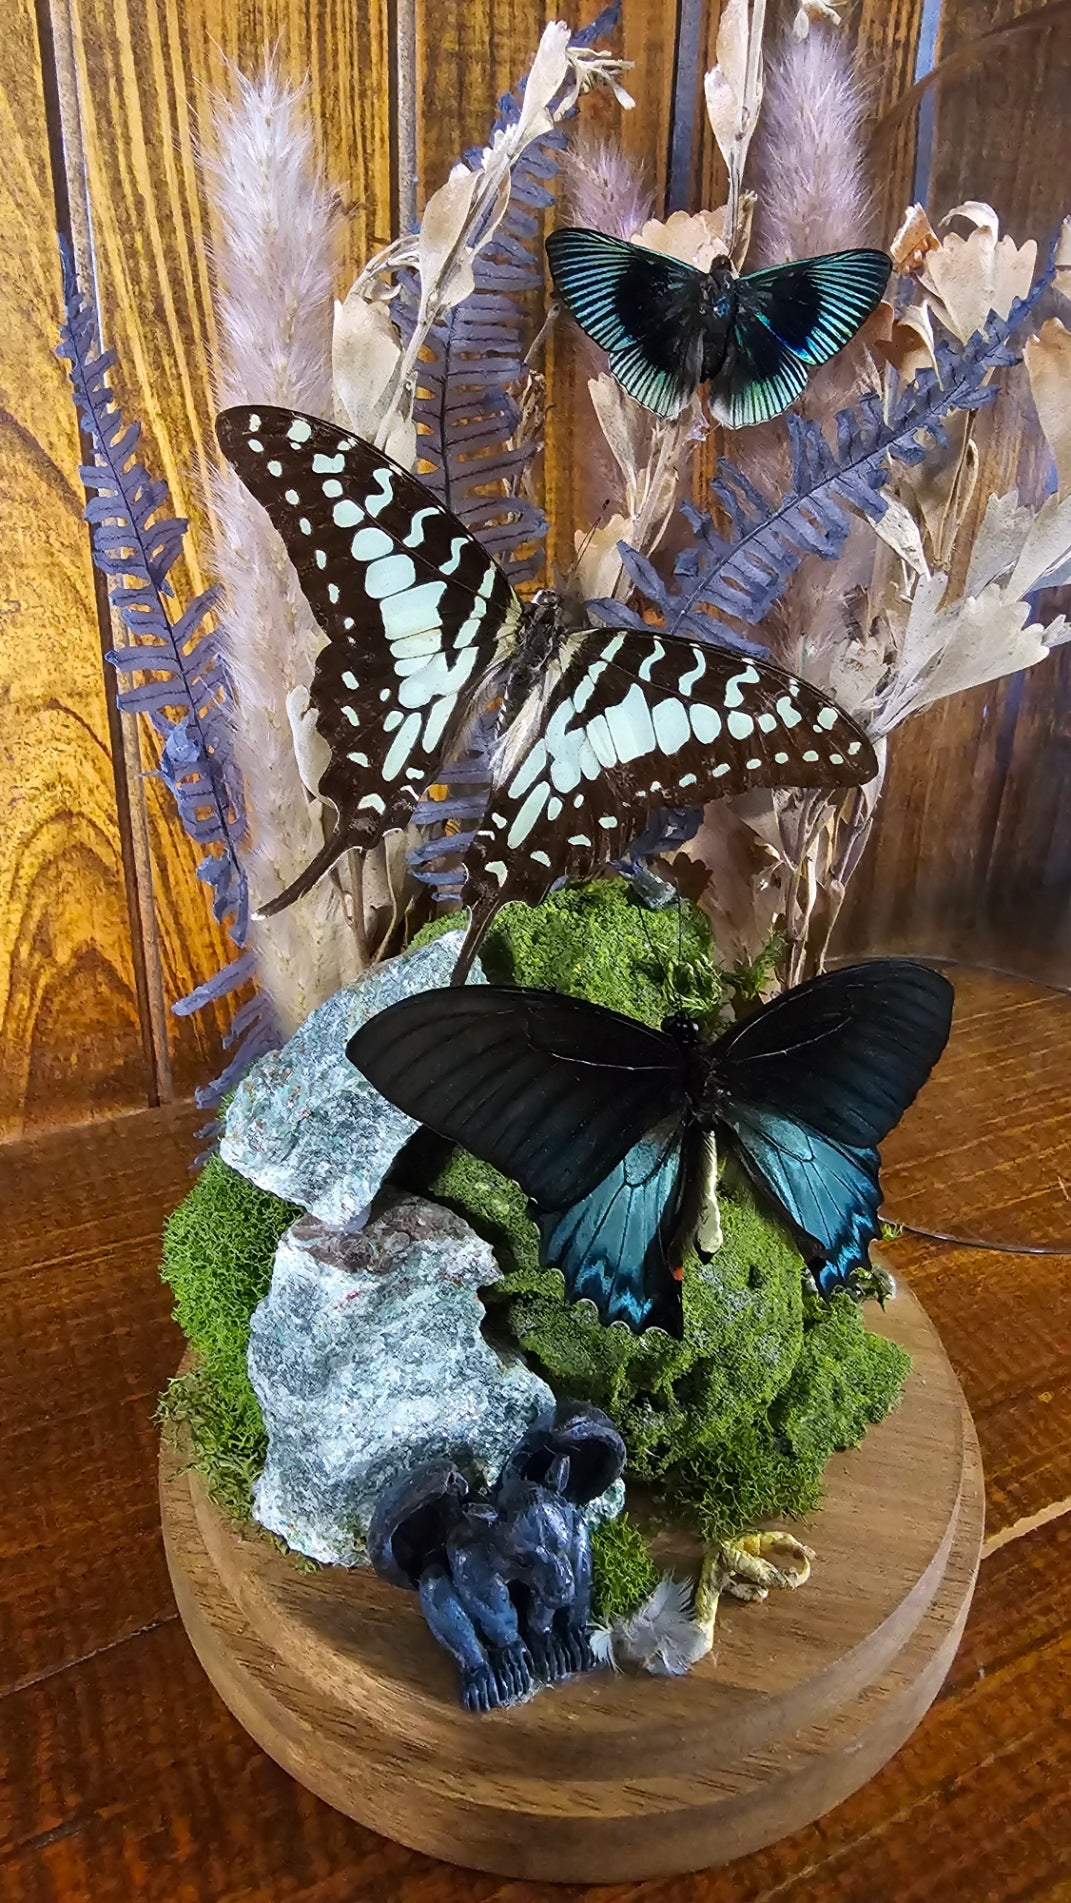 Large glass butterfly dome - Butterflies, bone, insects and crystals terrarium (26cm)